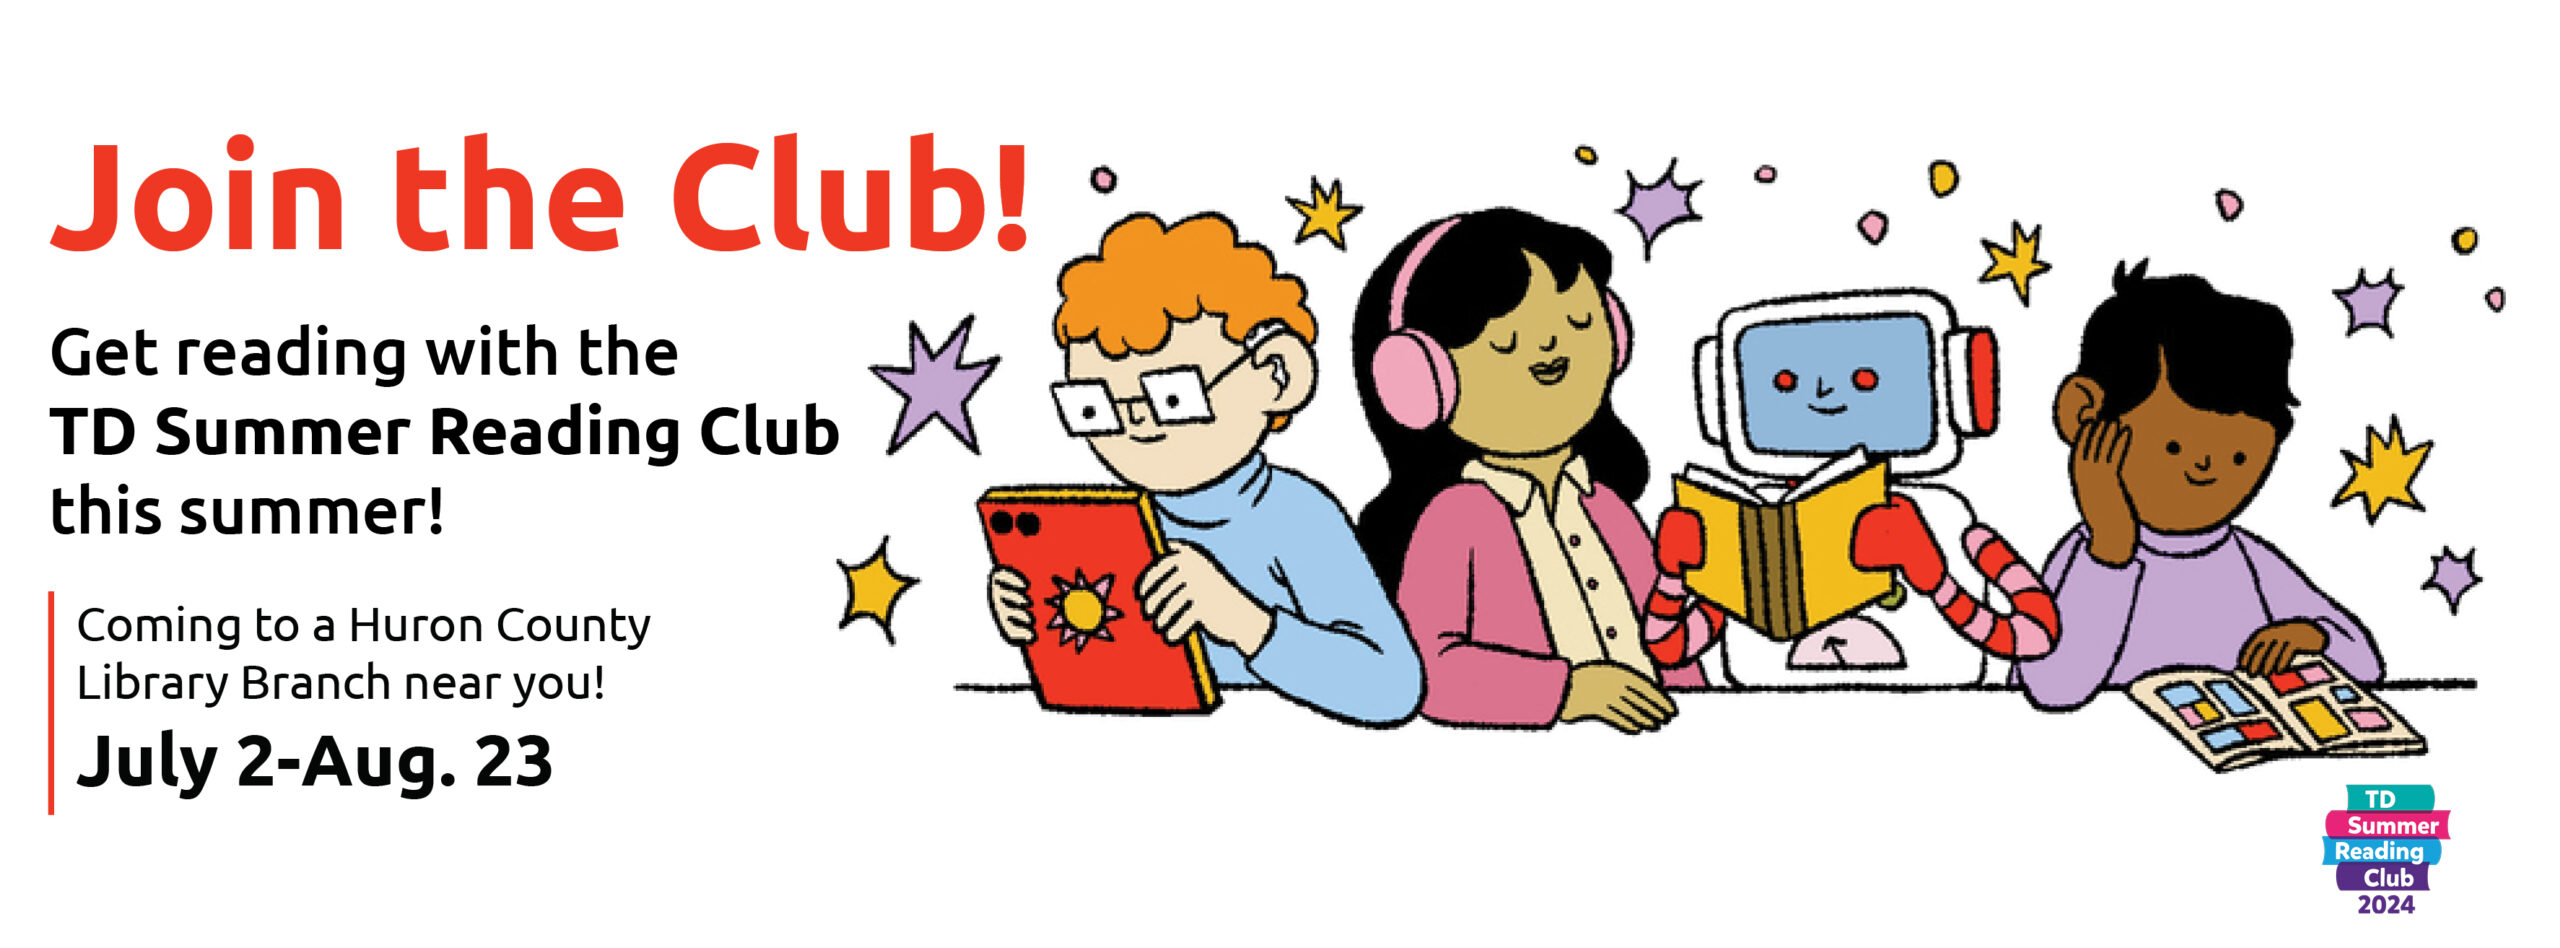 Illustration of kids reading with text promoting TD Summer Reading Club